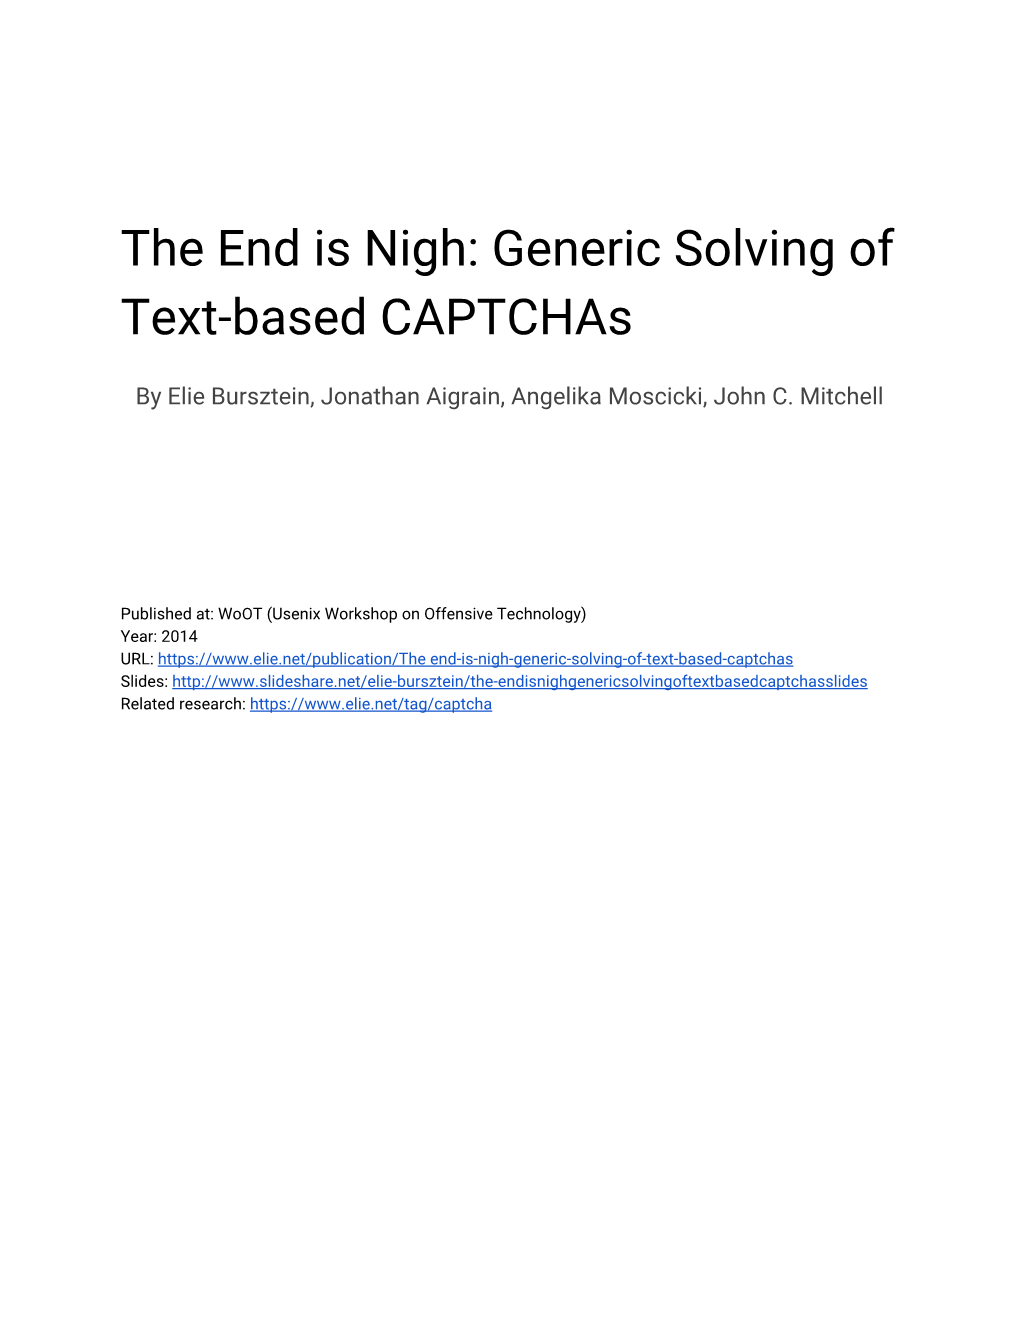 The End Is Nigh: Generic Solving of Text-Based Captchas